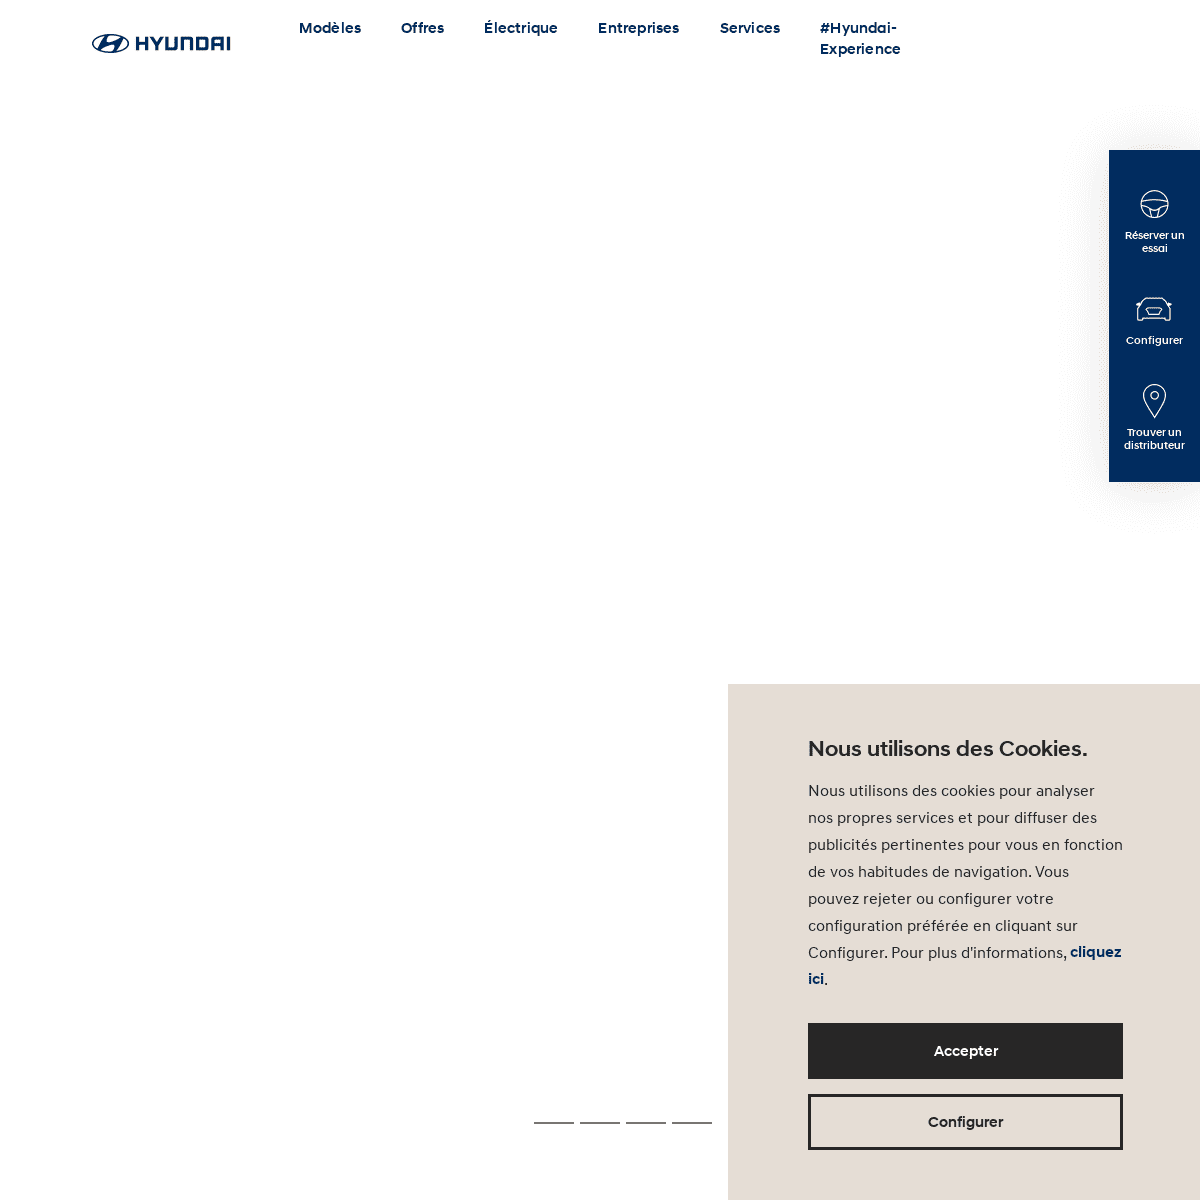 A complete backup of https://hyundai.fr